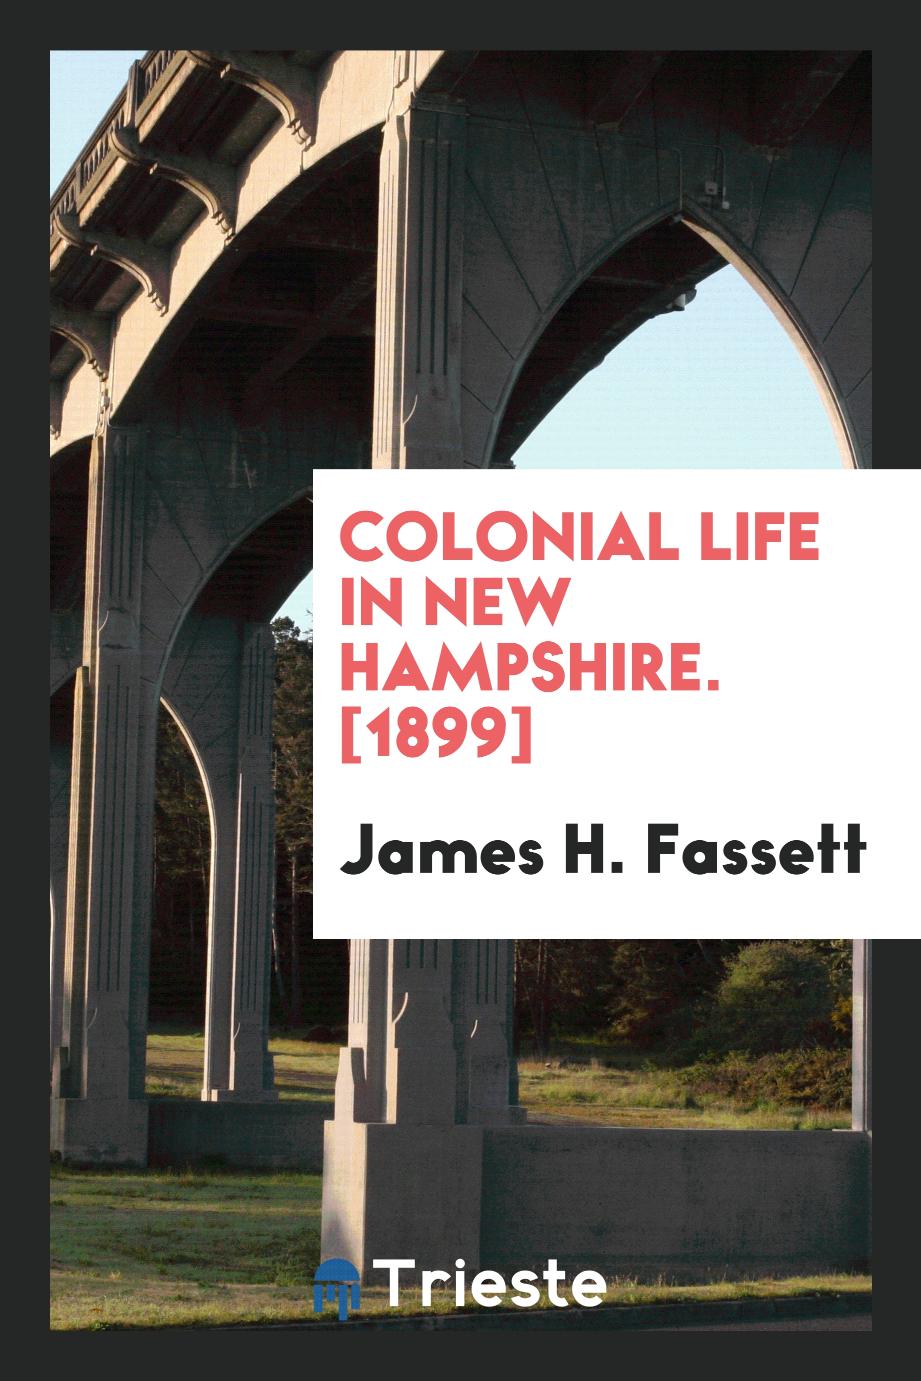 Colonial Life in New Hampshire. [1899]